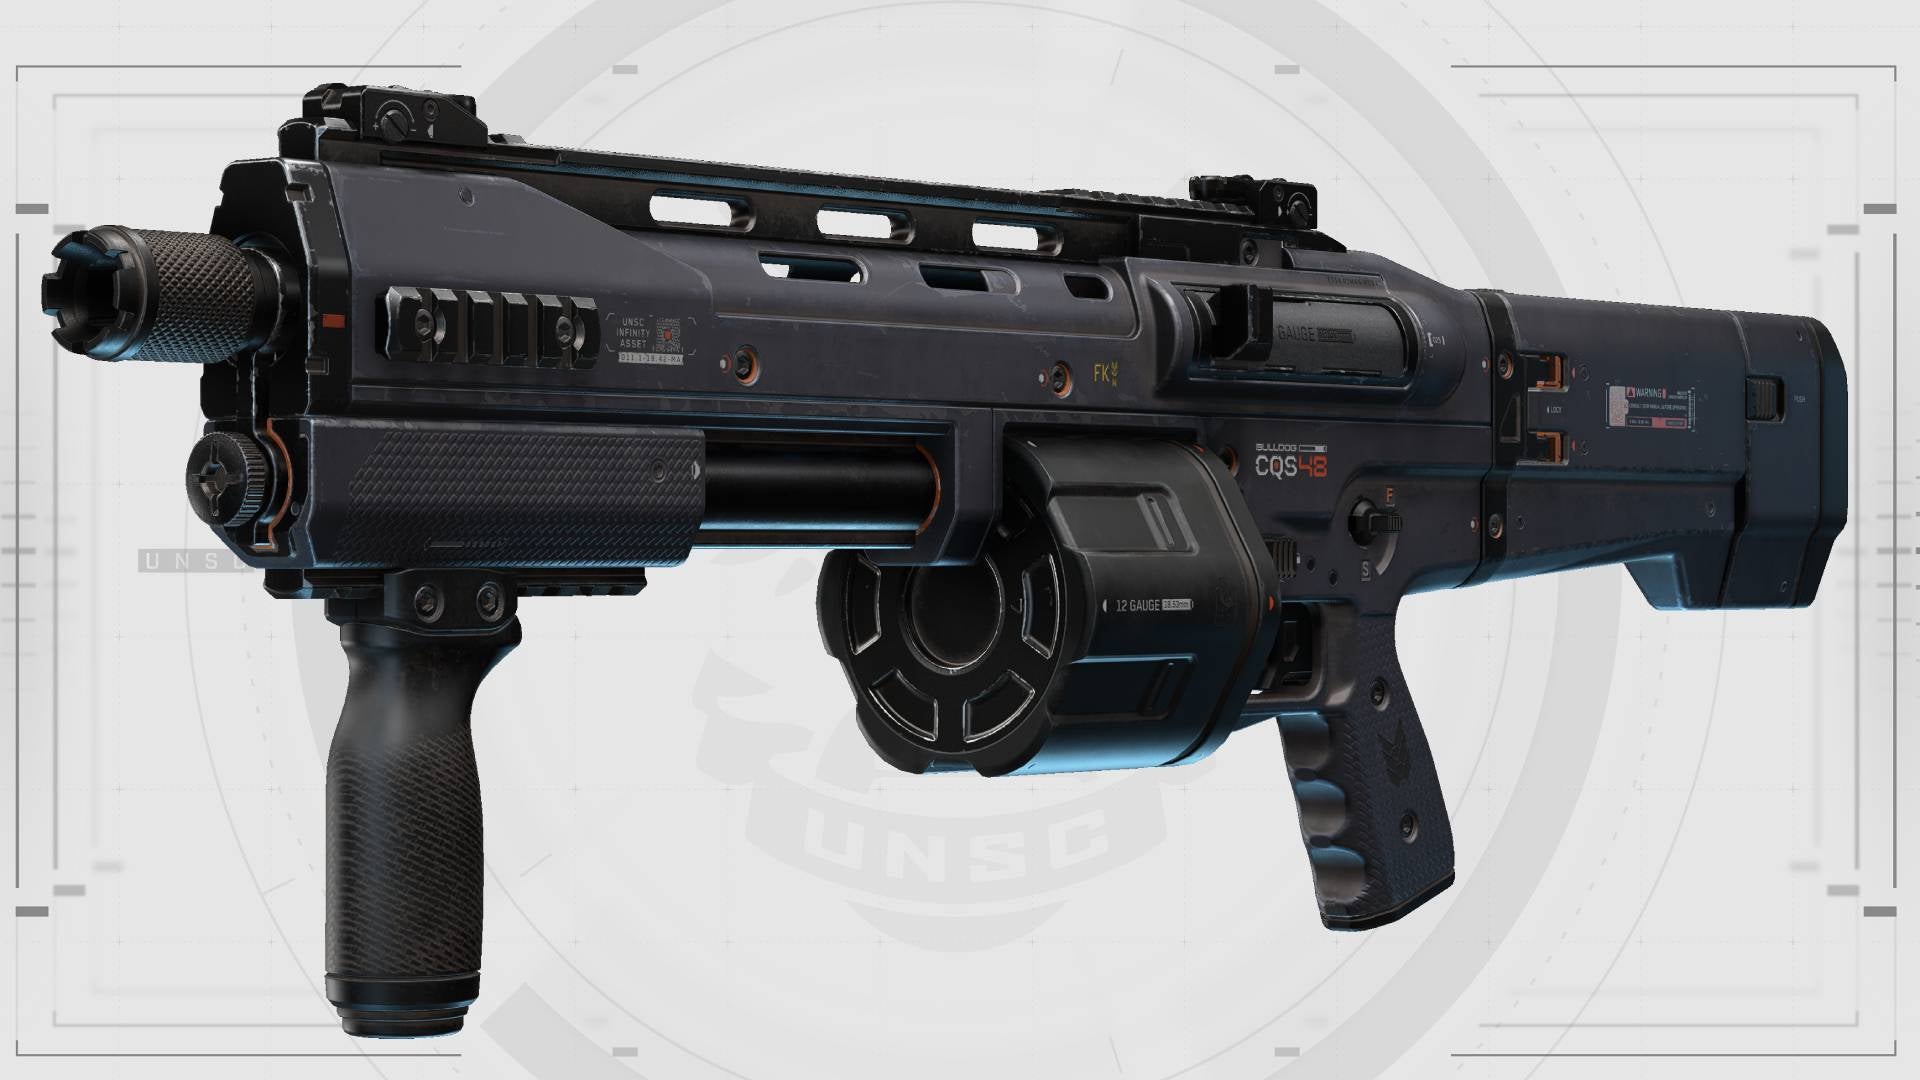 Mastering the bulldog demands rethinking how to use a Halo shotgun. (Image: 343 Industries)